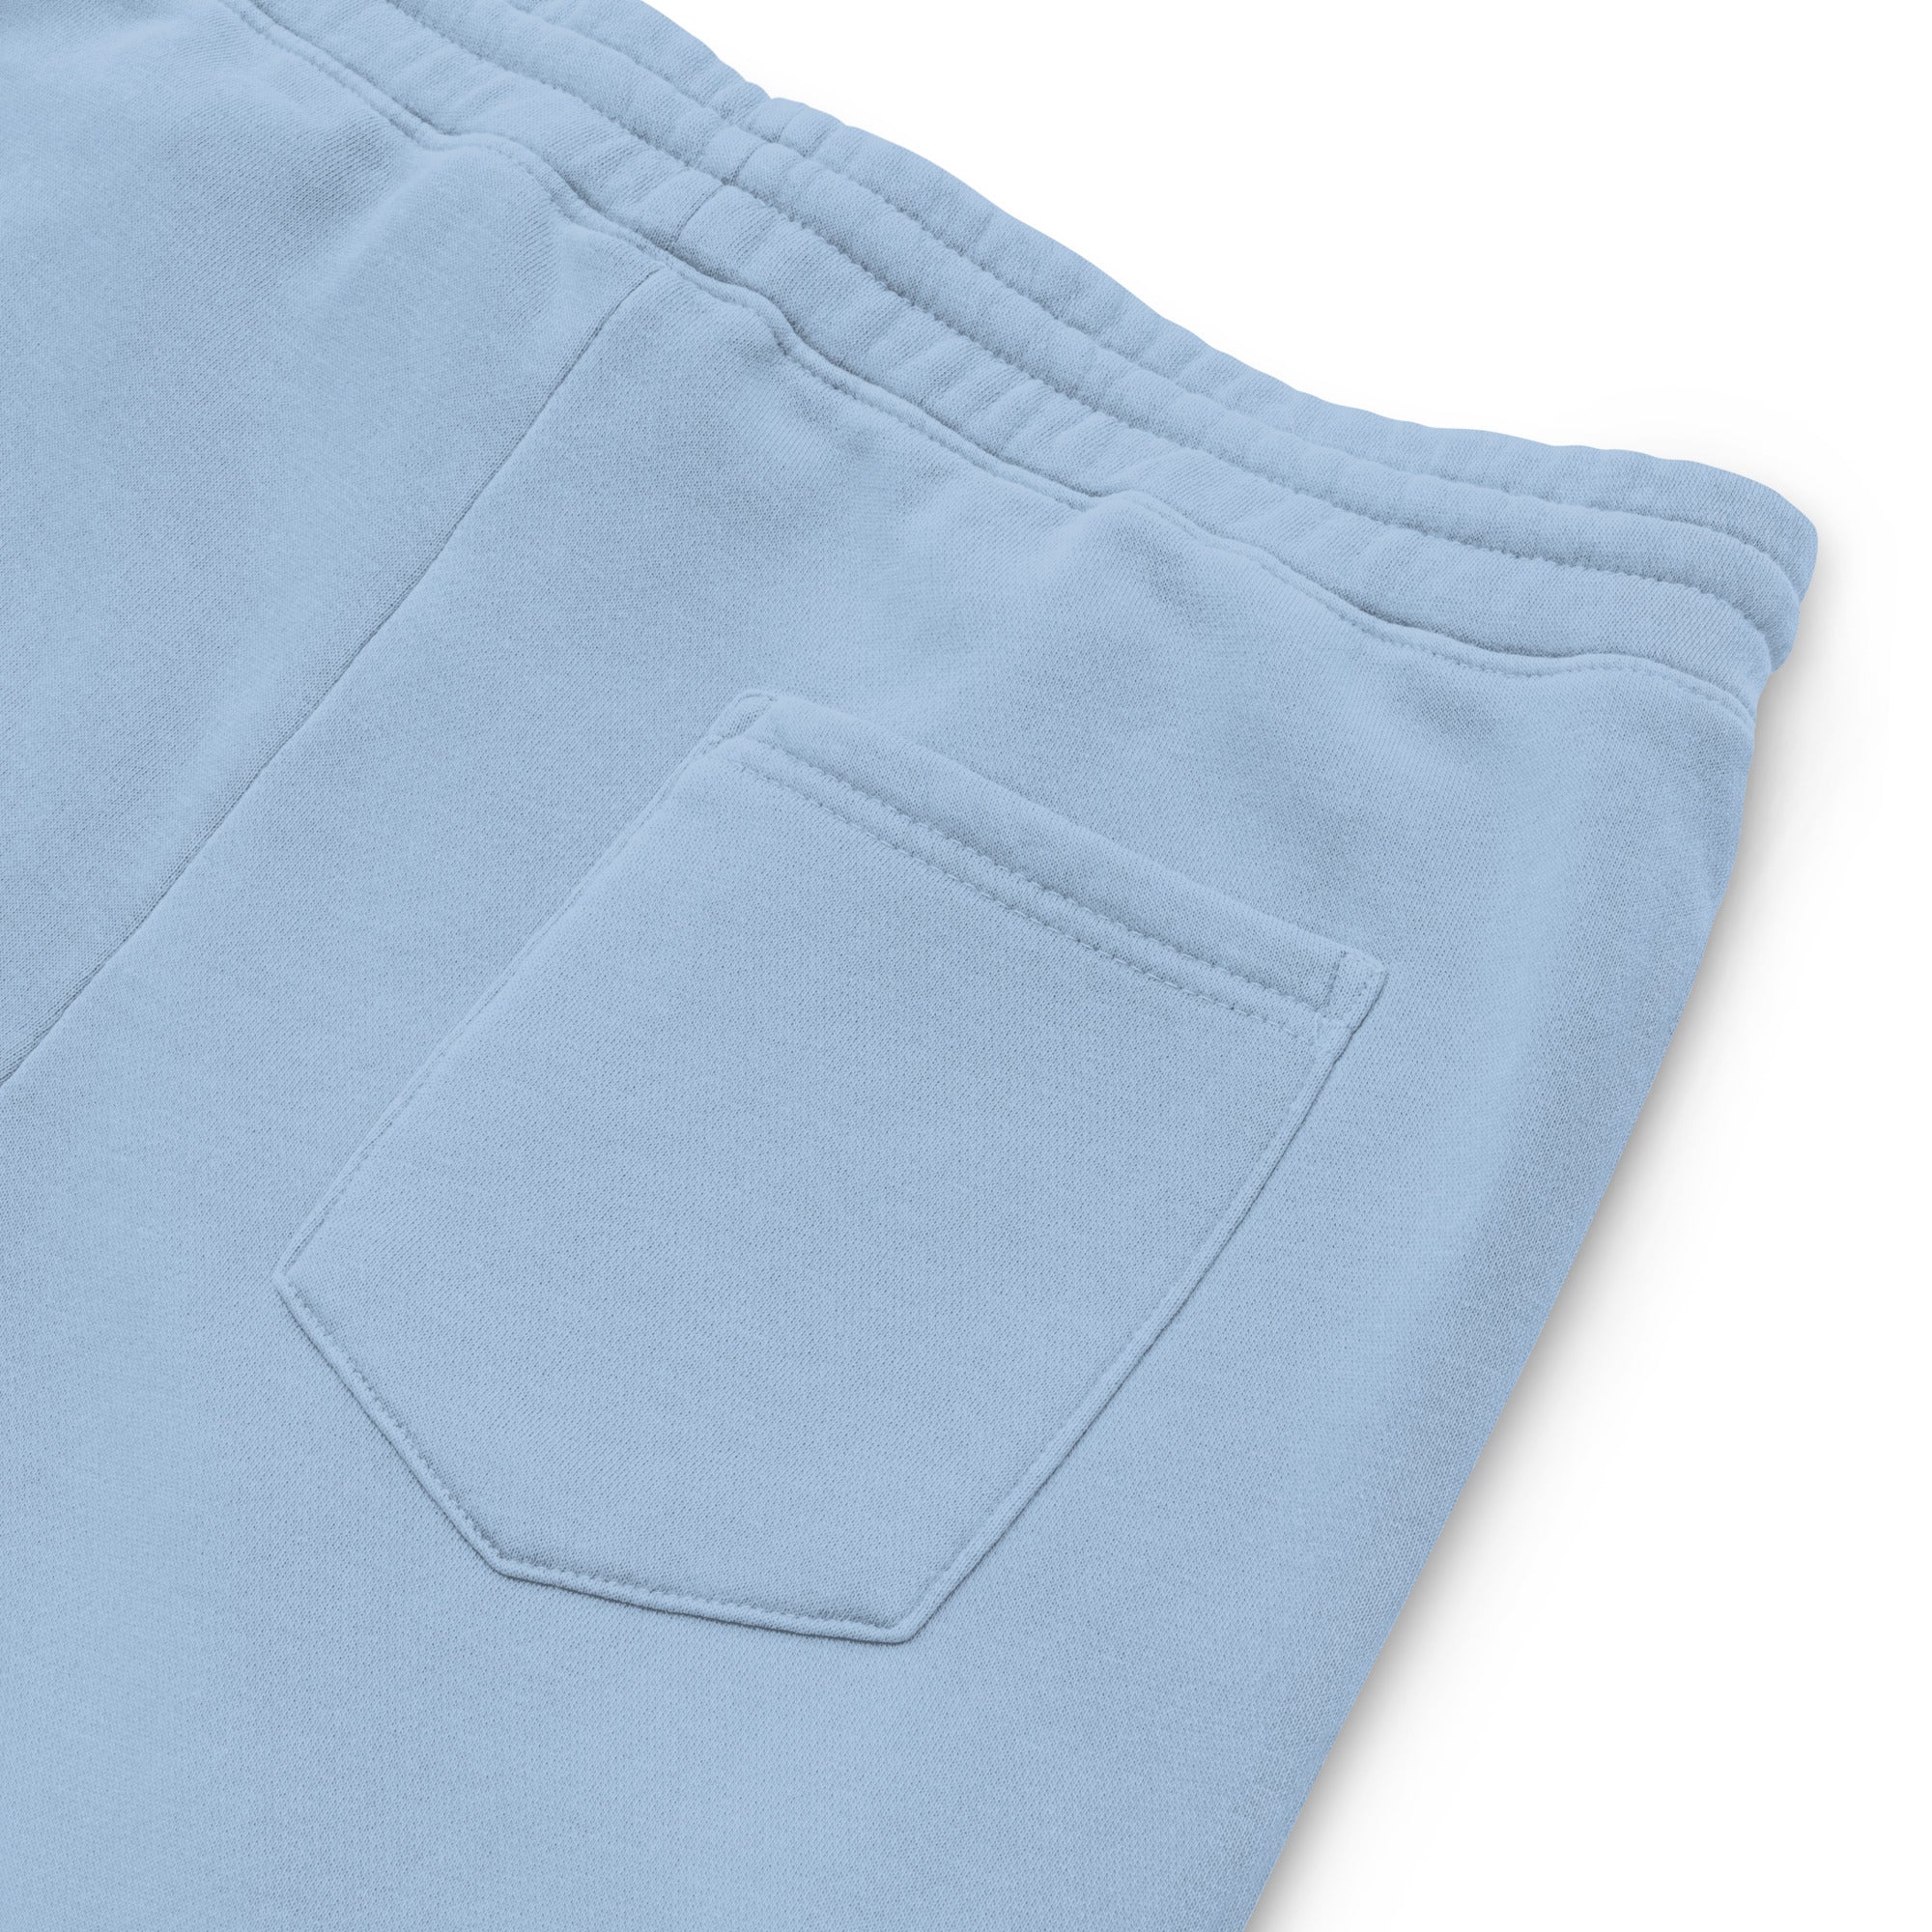 Unisex pigment-dyed yoga sweatpants - Personal Hour for Yoga and Meditations 